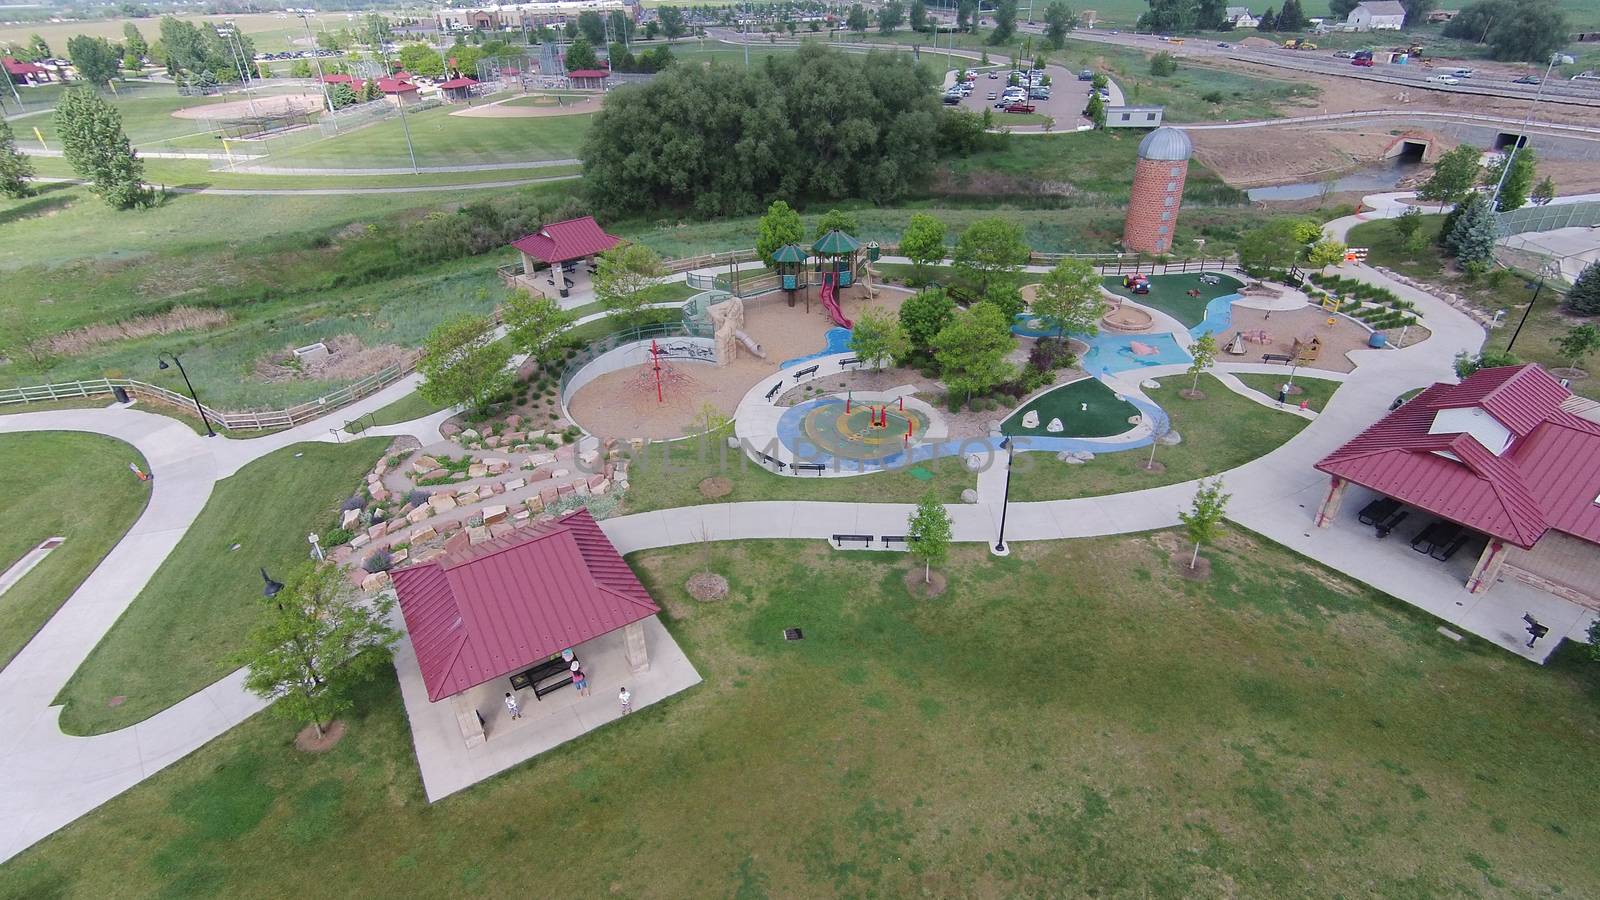 Aerial view of the children’s playground at Sandstone Ranch, Longmont, CO